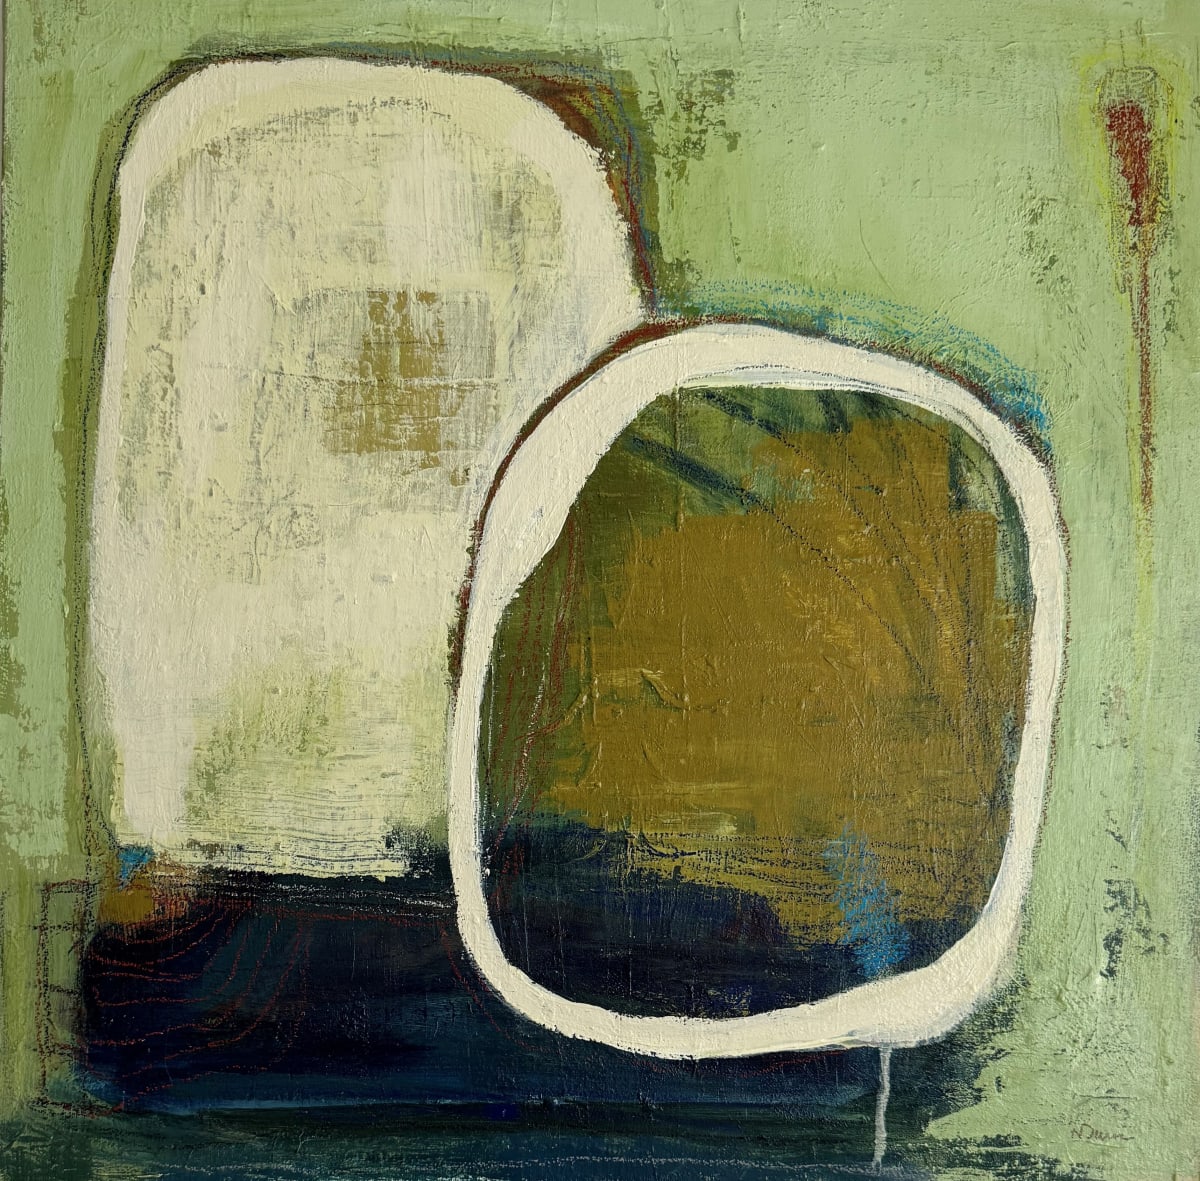 Green Fields #2 by Heather Duris  Image: Abstract landscape